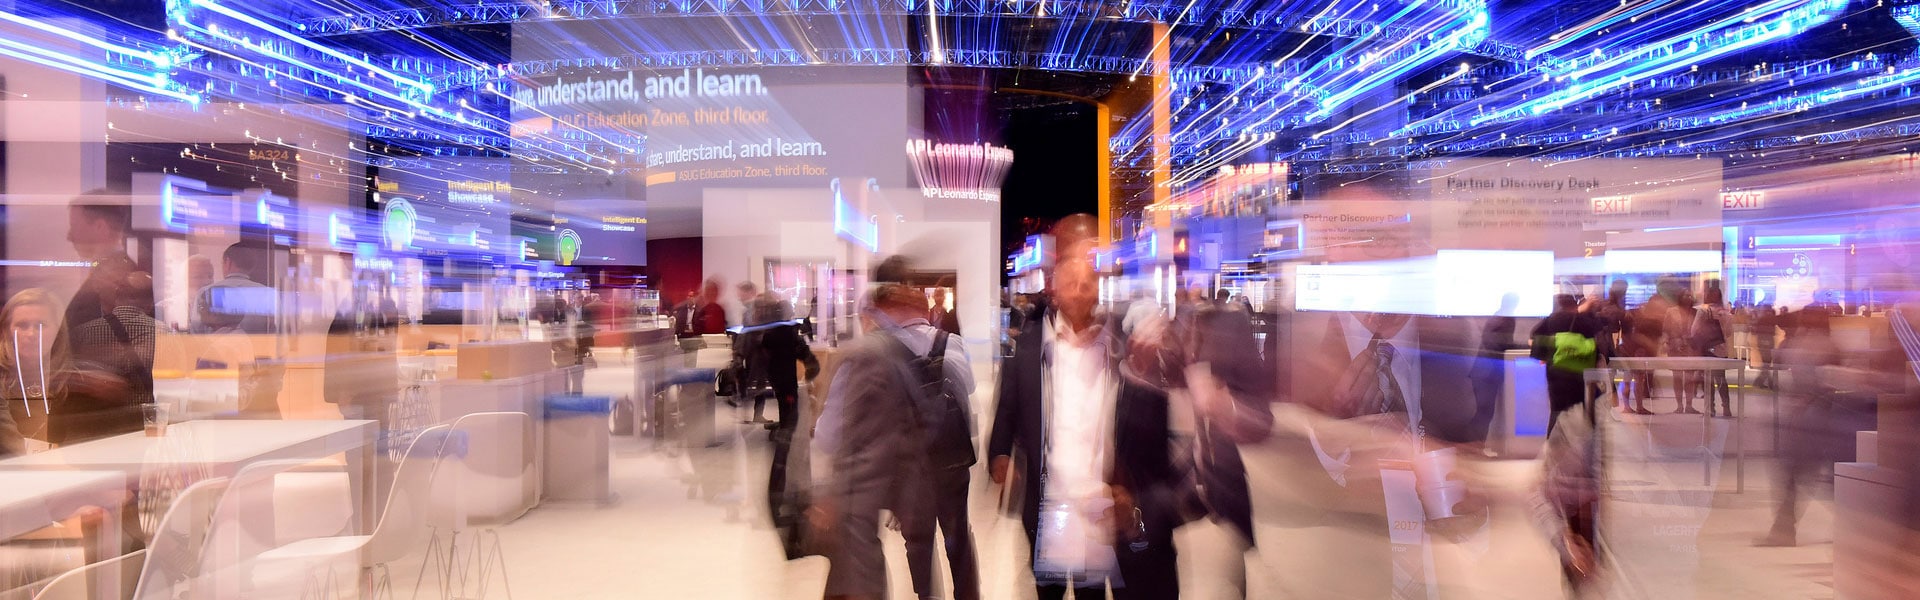 Blurred shot of show floor at SAPPHIRE NOW event